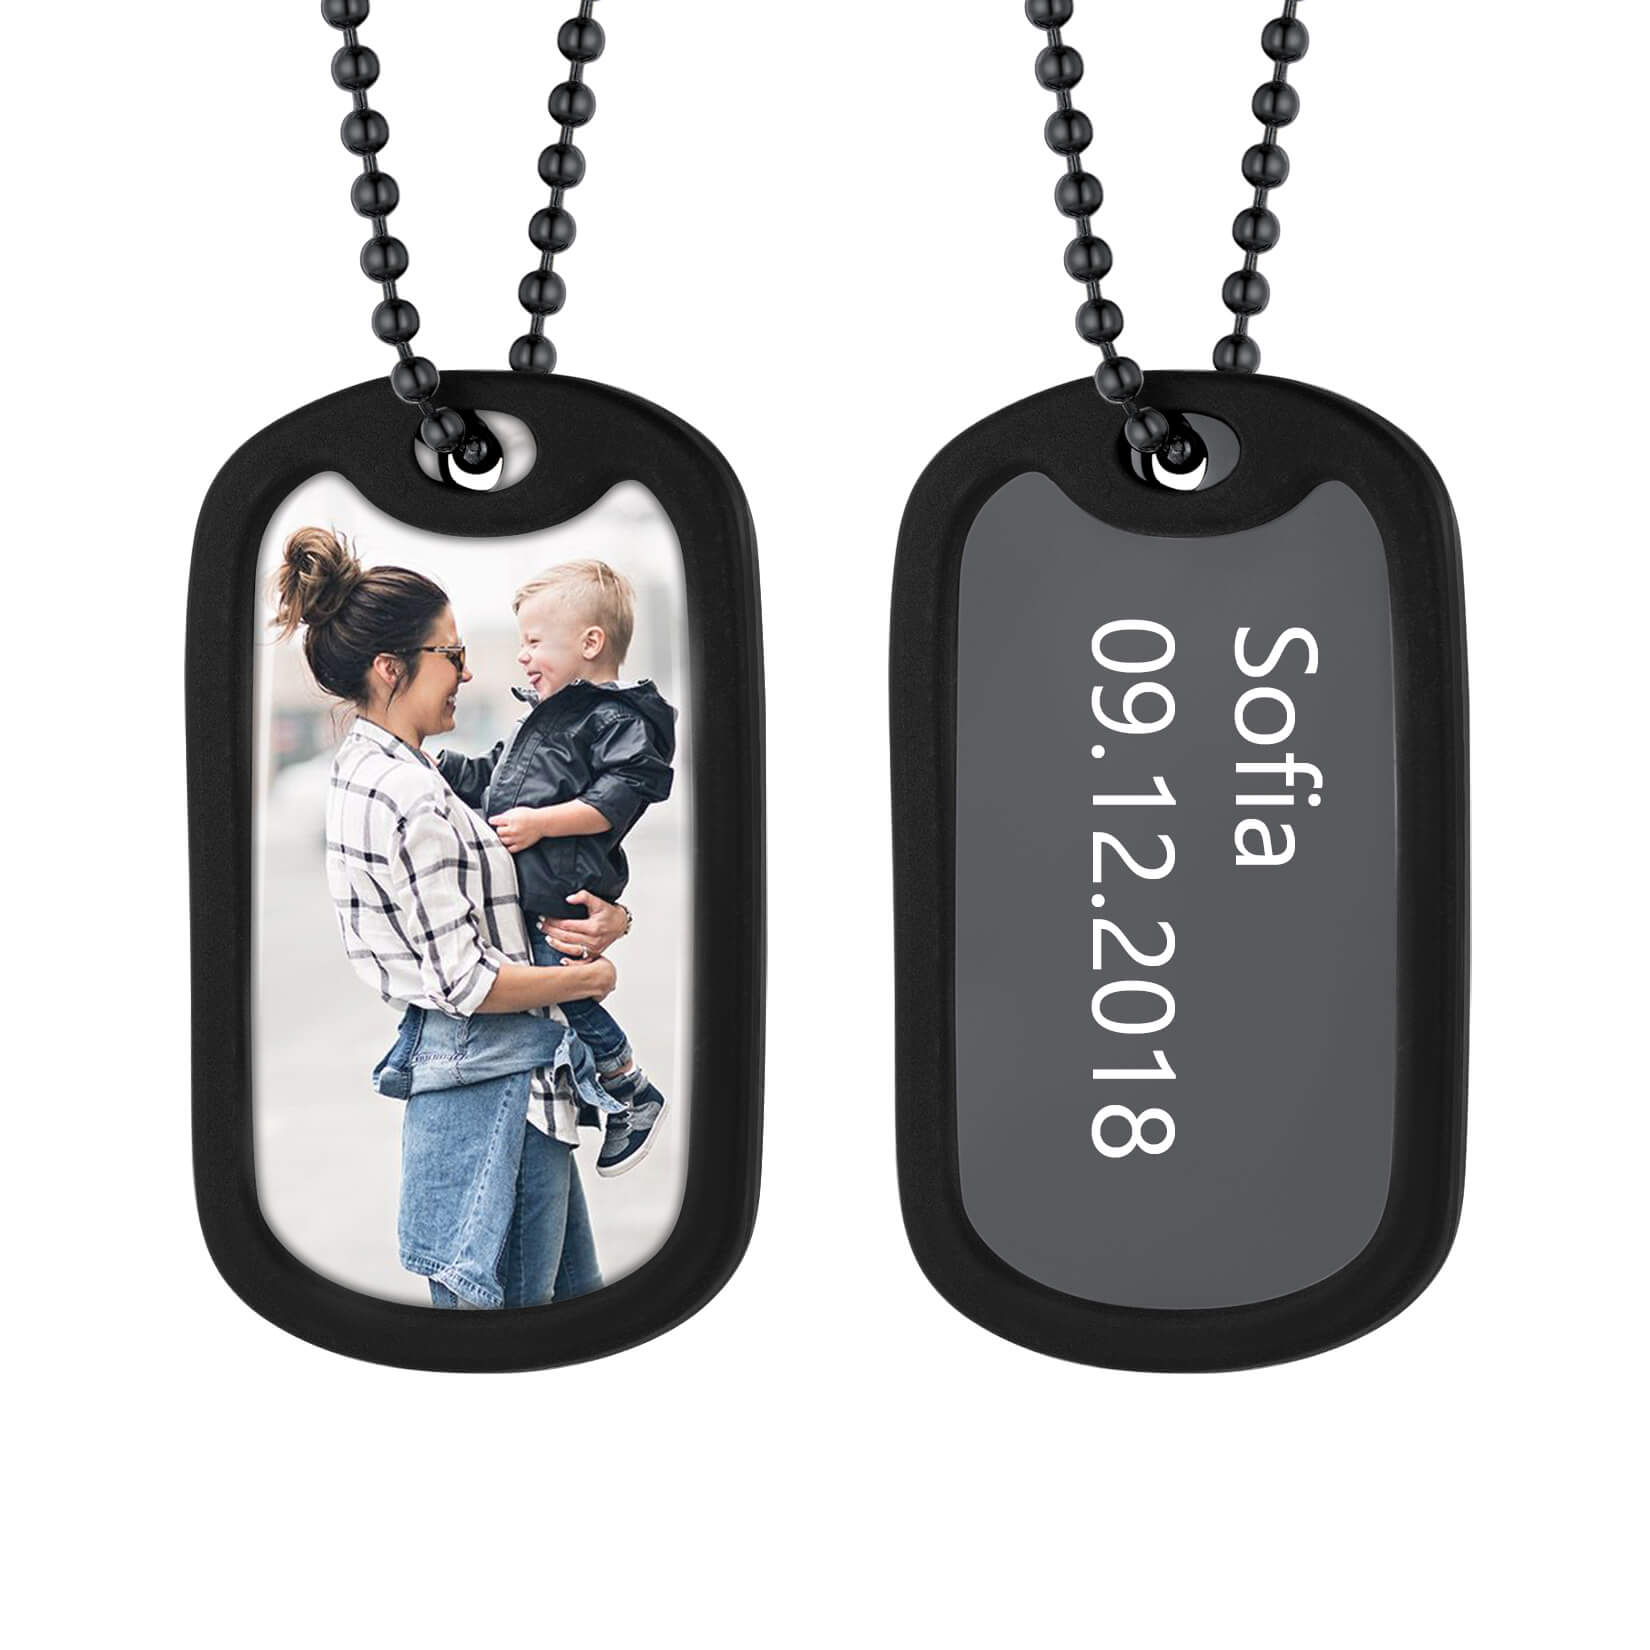 Customized Military Dog Tags - Real Stainless Steel and 100% Authentic -  Military Memories and More